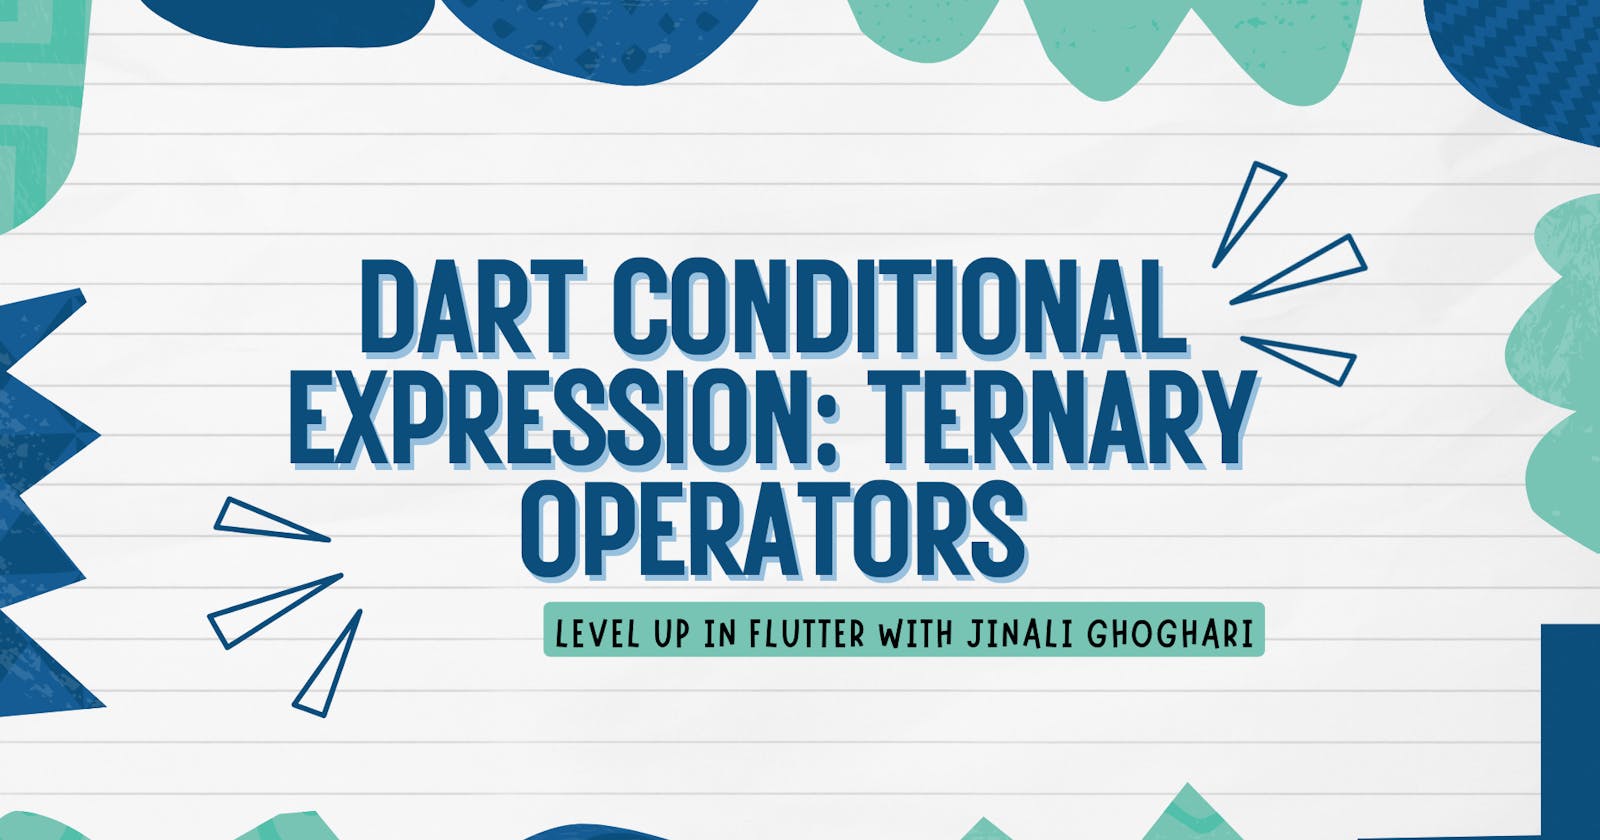 Dart Conditional Expression: Ternary Operators